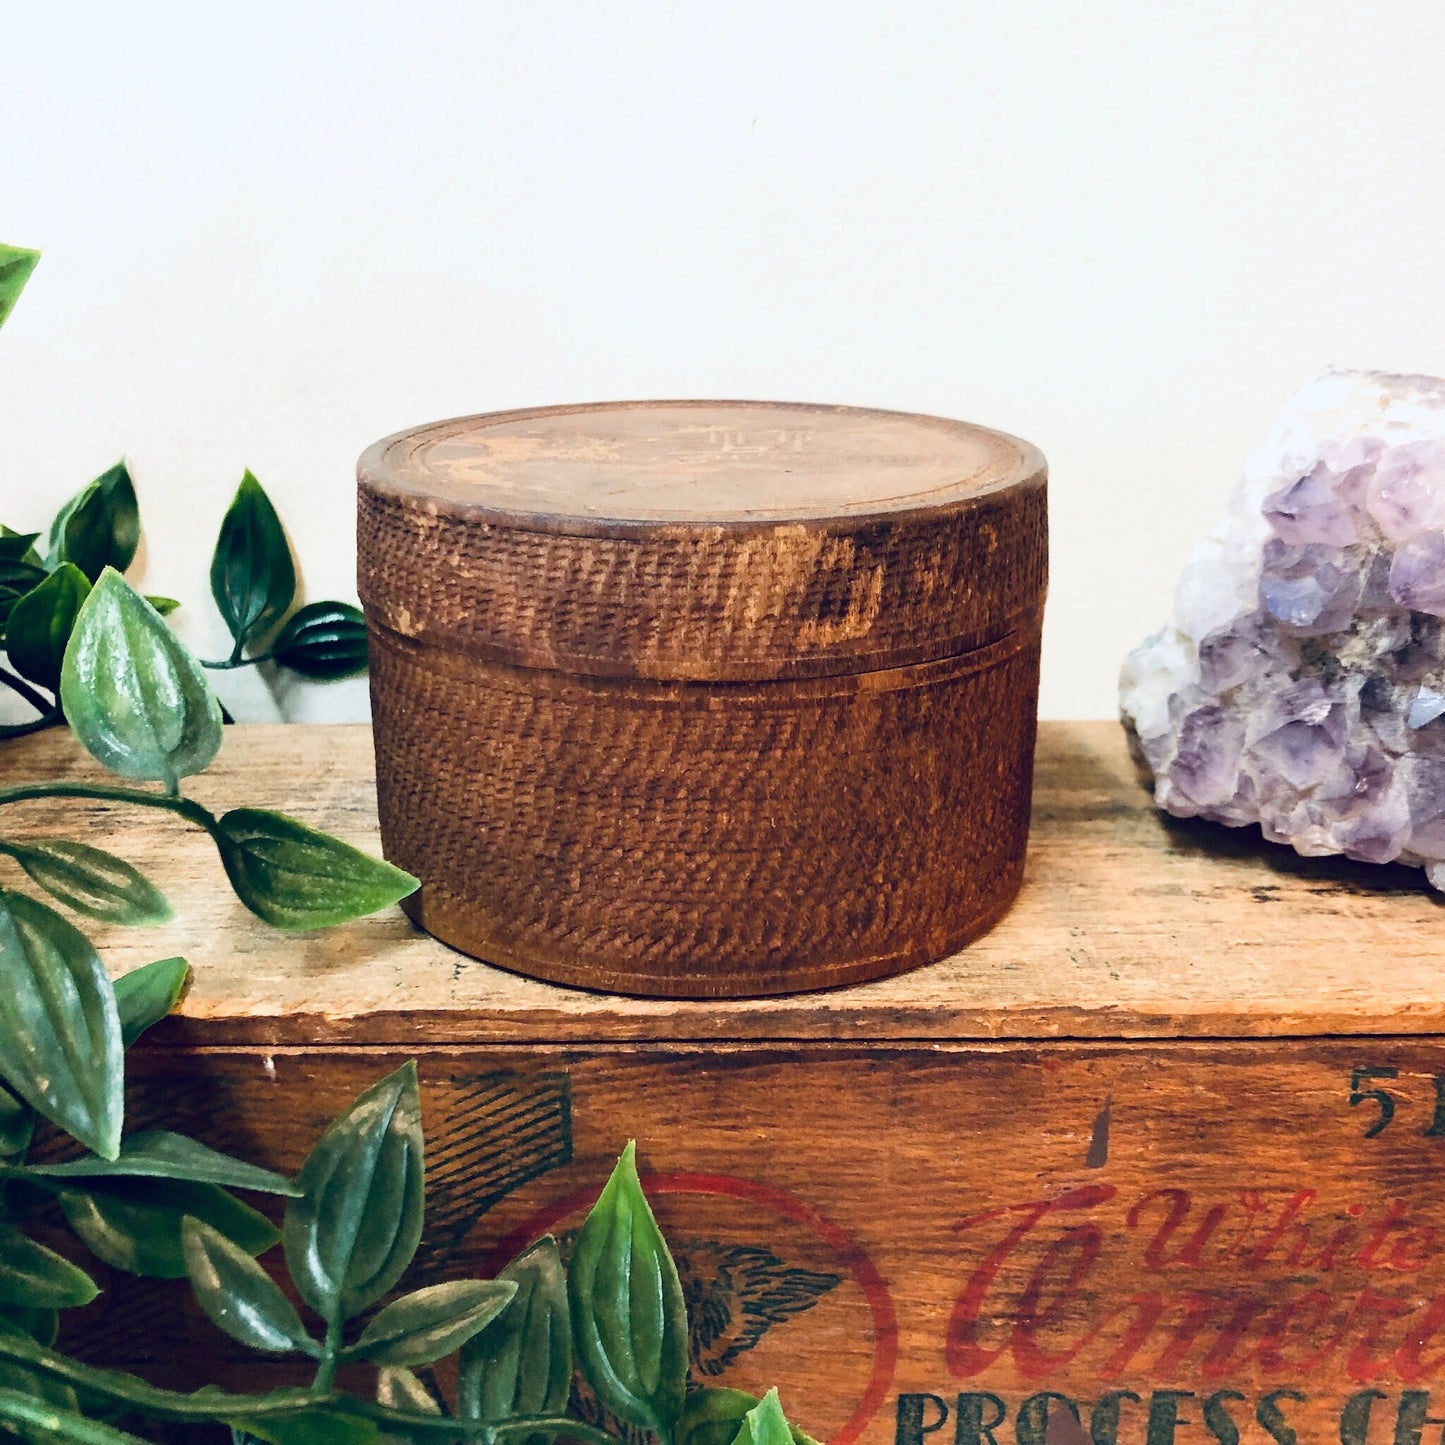 Round wooden carved trinket box on rustic table with plants and amethyst crystal